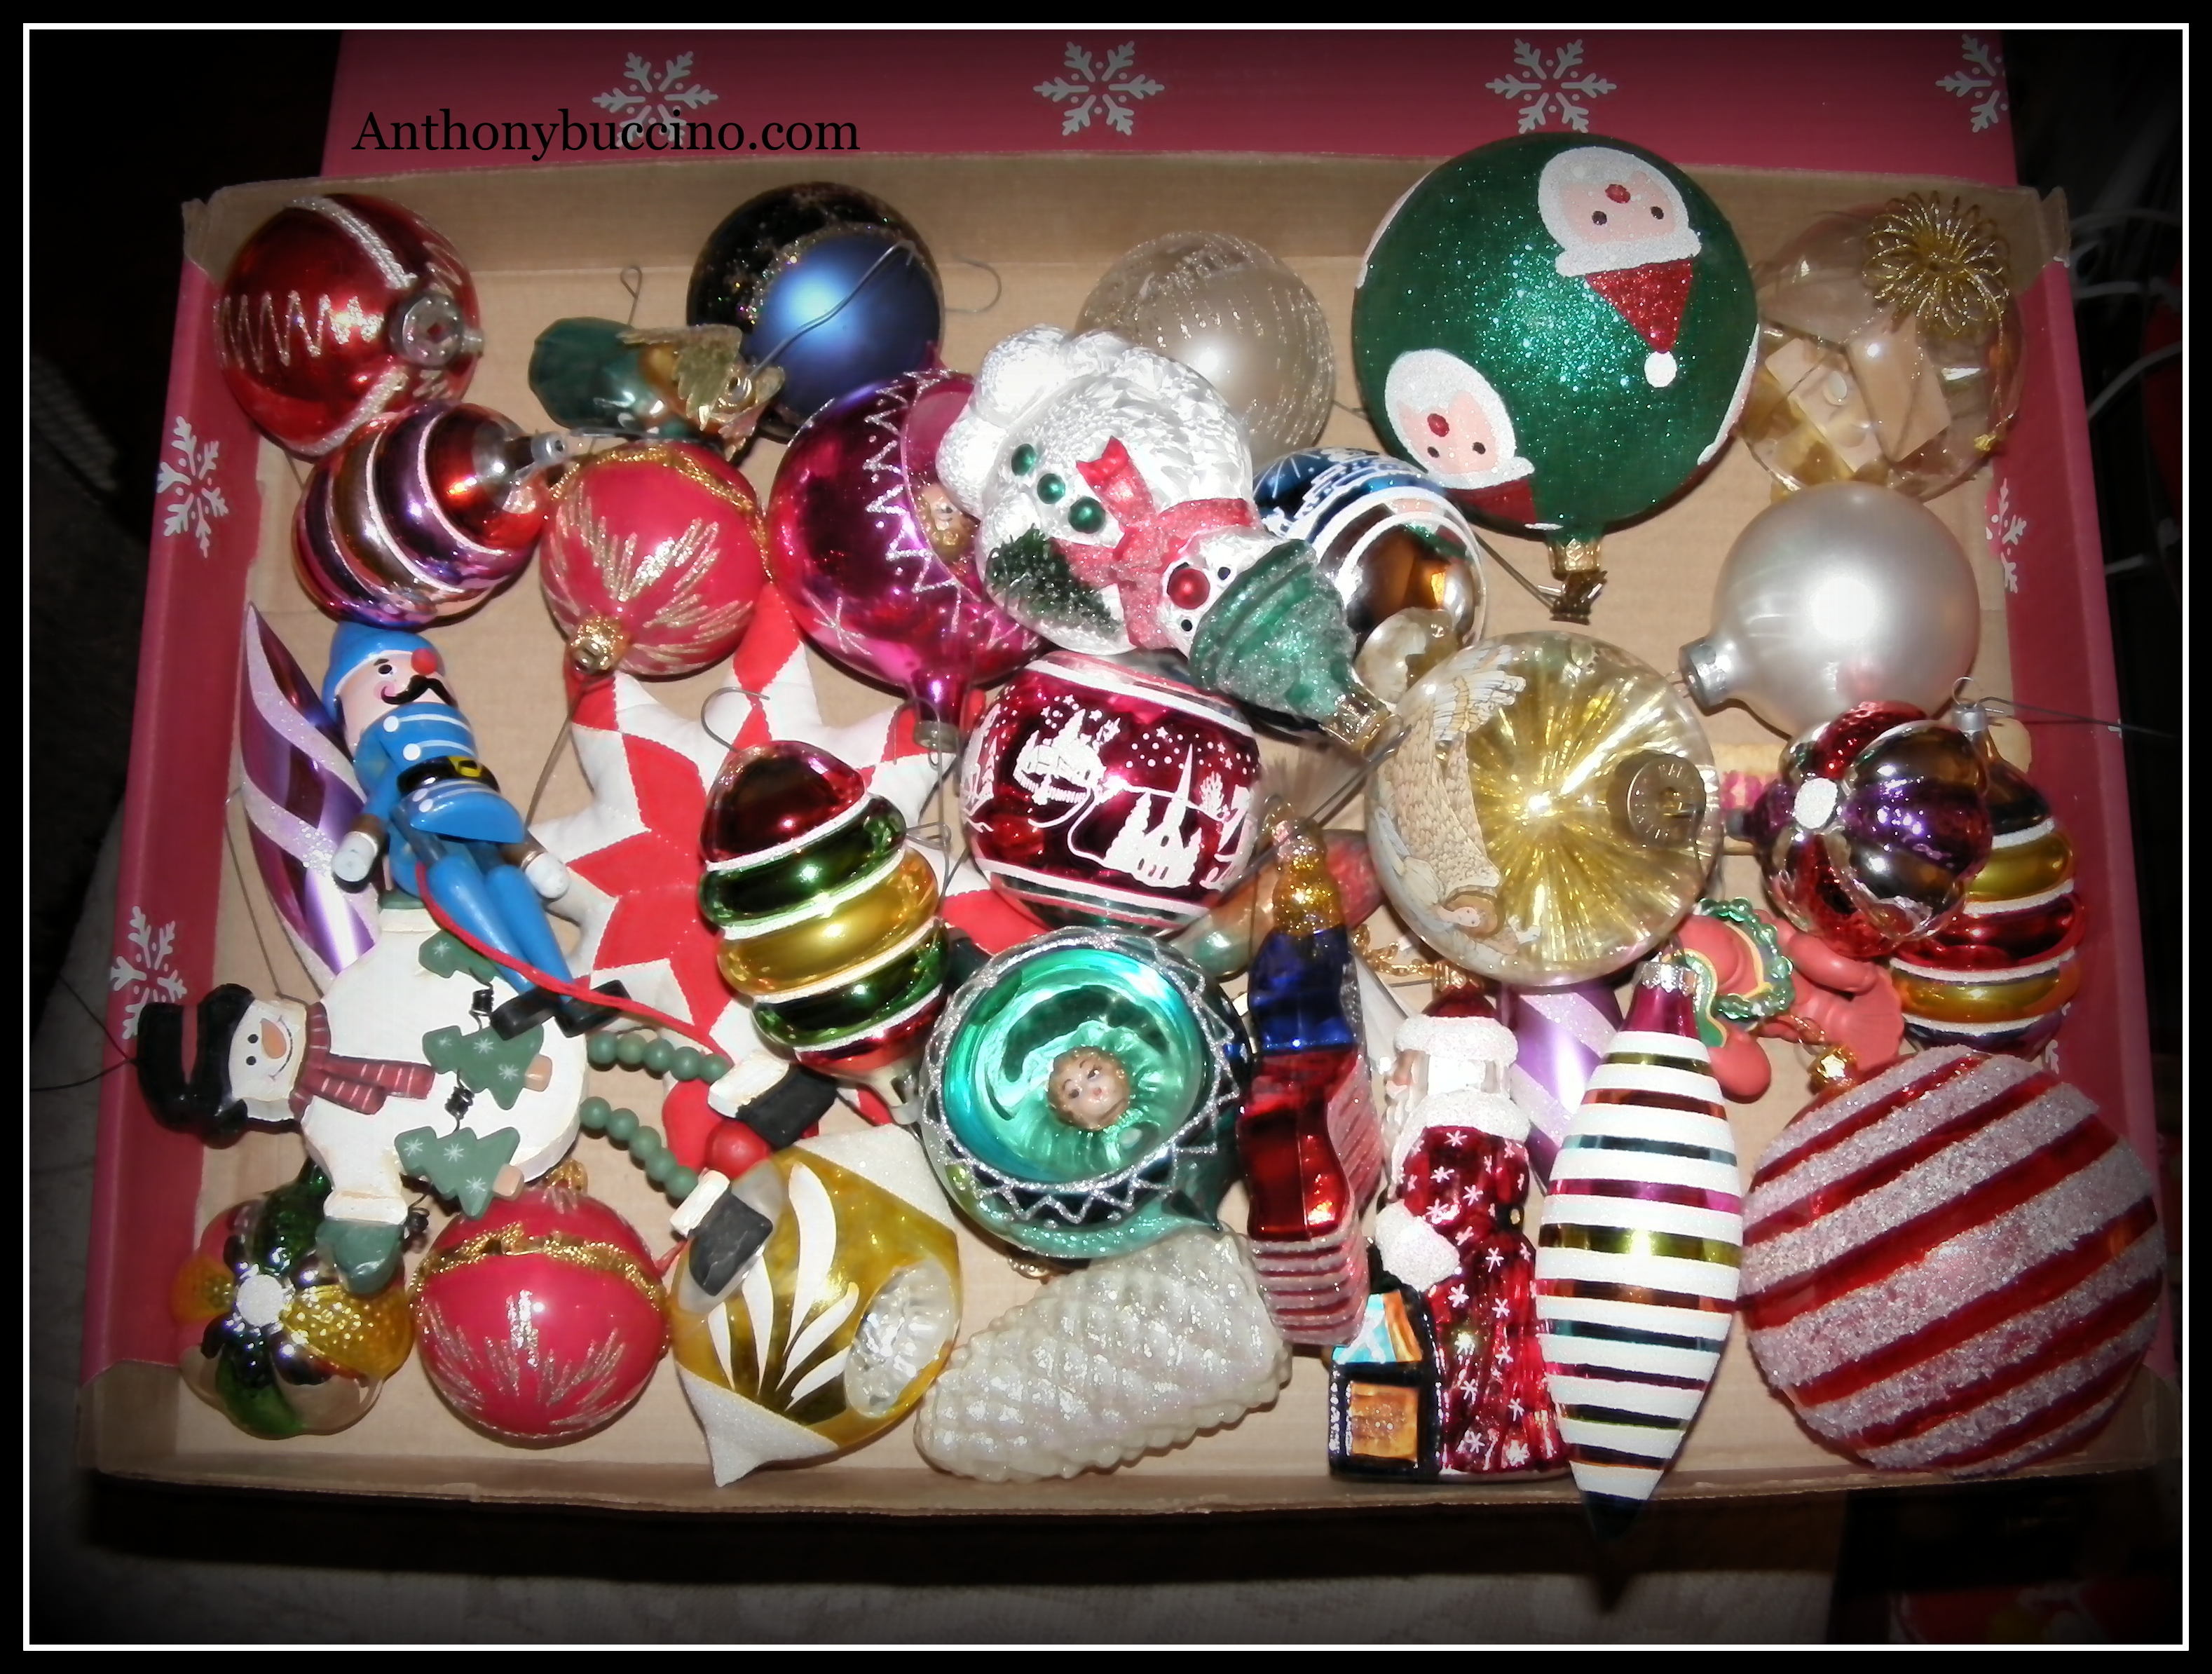 Christmas Tree Ornaments, to hang or not to hang - by Anthony Buccino Copyright © 2009 